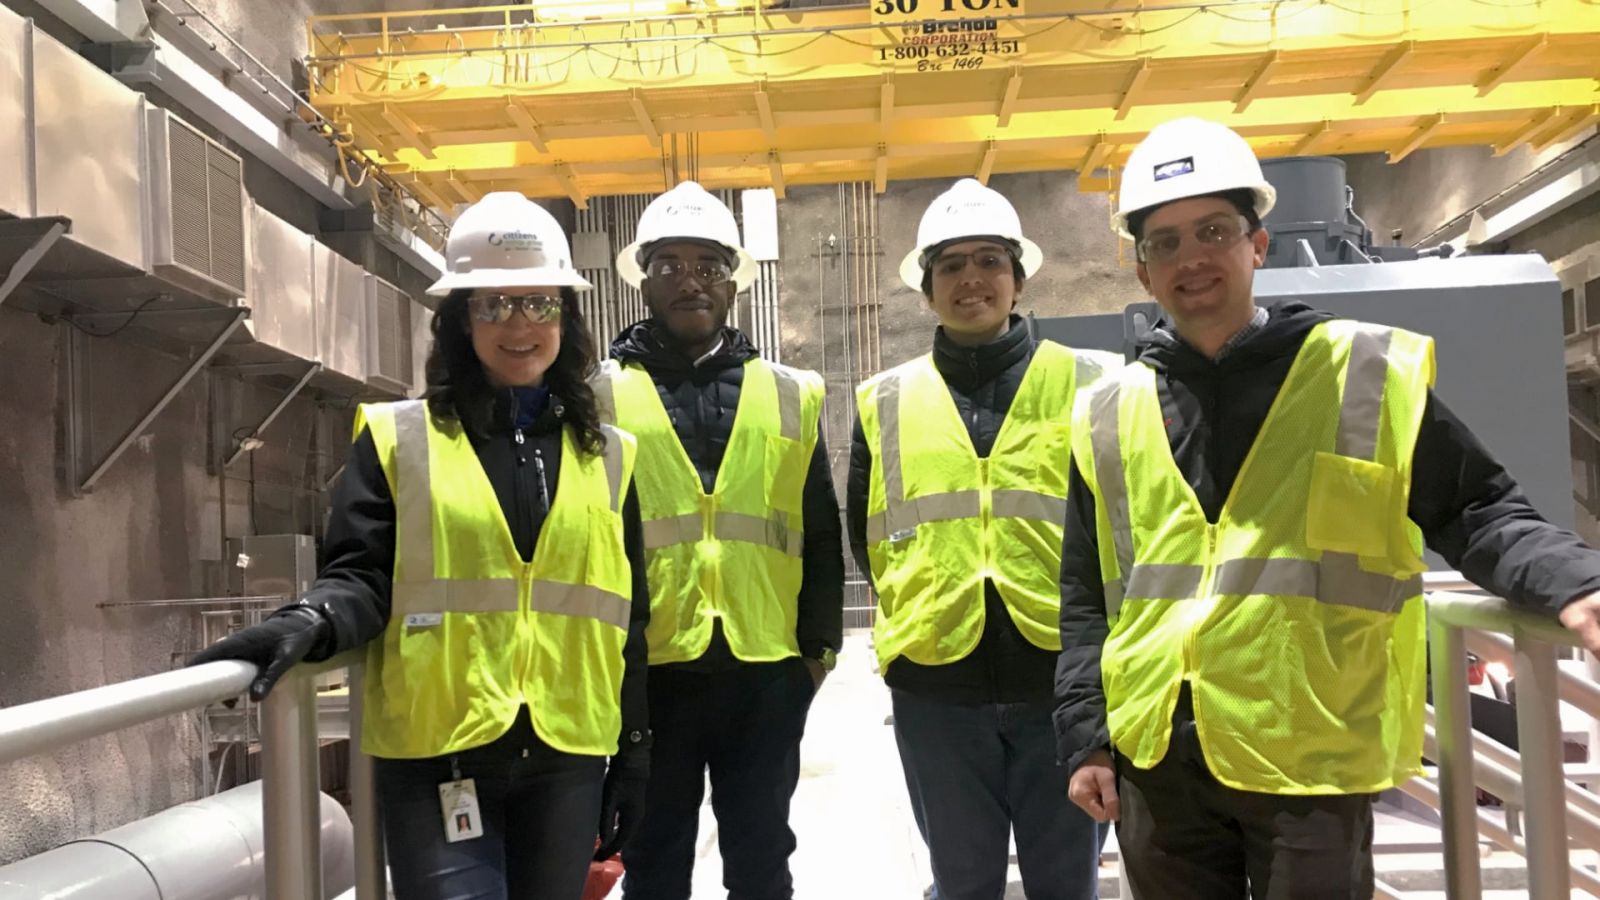 Left to right: Olivia Hawbaker, project manager for underground engineering & construction, Citizens Energy Group; Jhon Quiñones, doctoral student in Purdue Polytechnic’s School of Engineering Technology; Luis Maldonado, master’s student in Engineering Technology; and Jason Ostanek, assistant professor of engineering technology